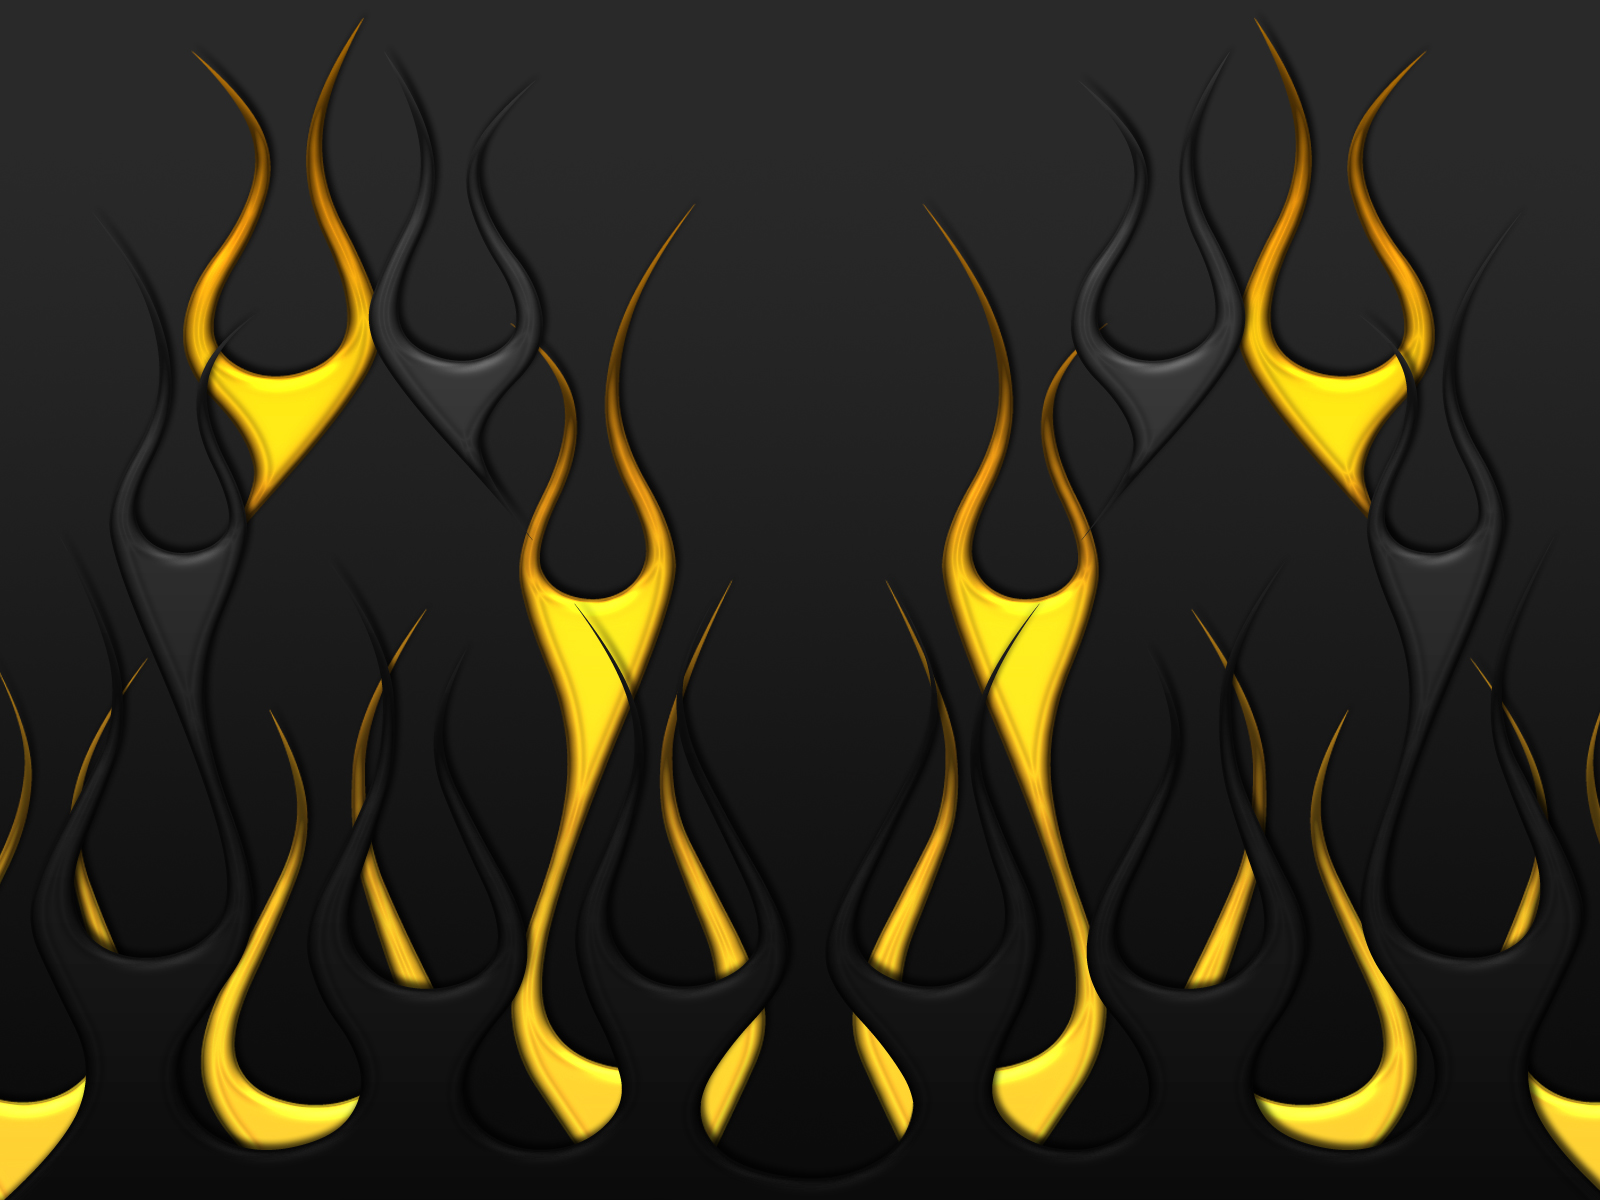 Flames - Black and Gold